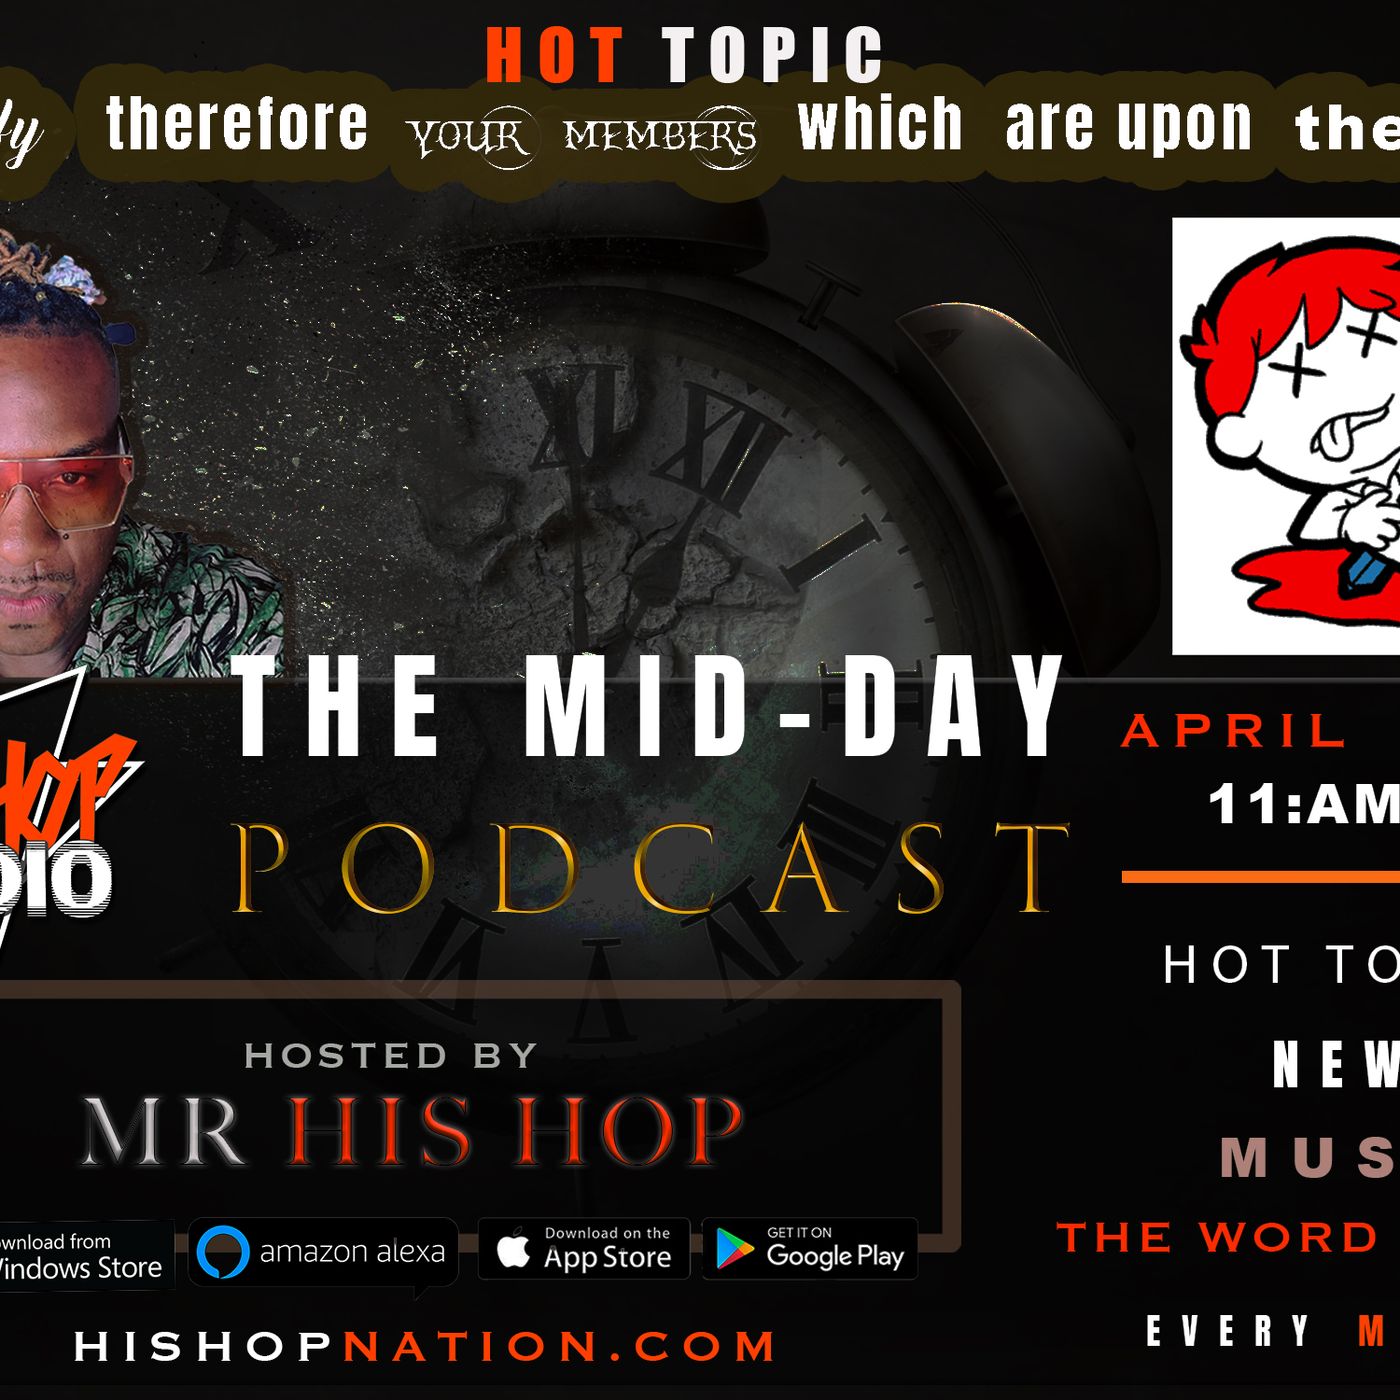 EPISODE 95 - HIS HOP RADIO & PODCAST NETWORK - Mortify therefore your members which are upon the earth